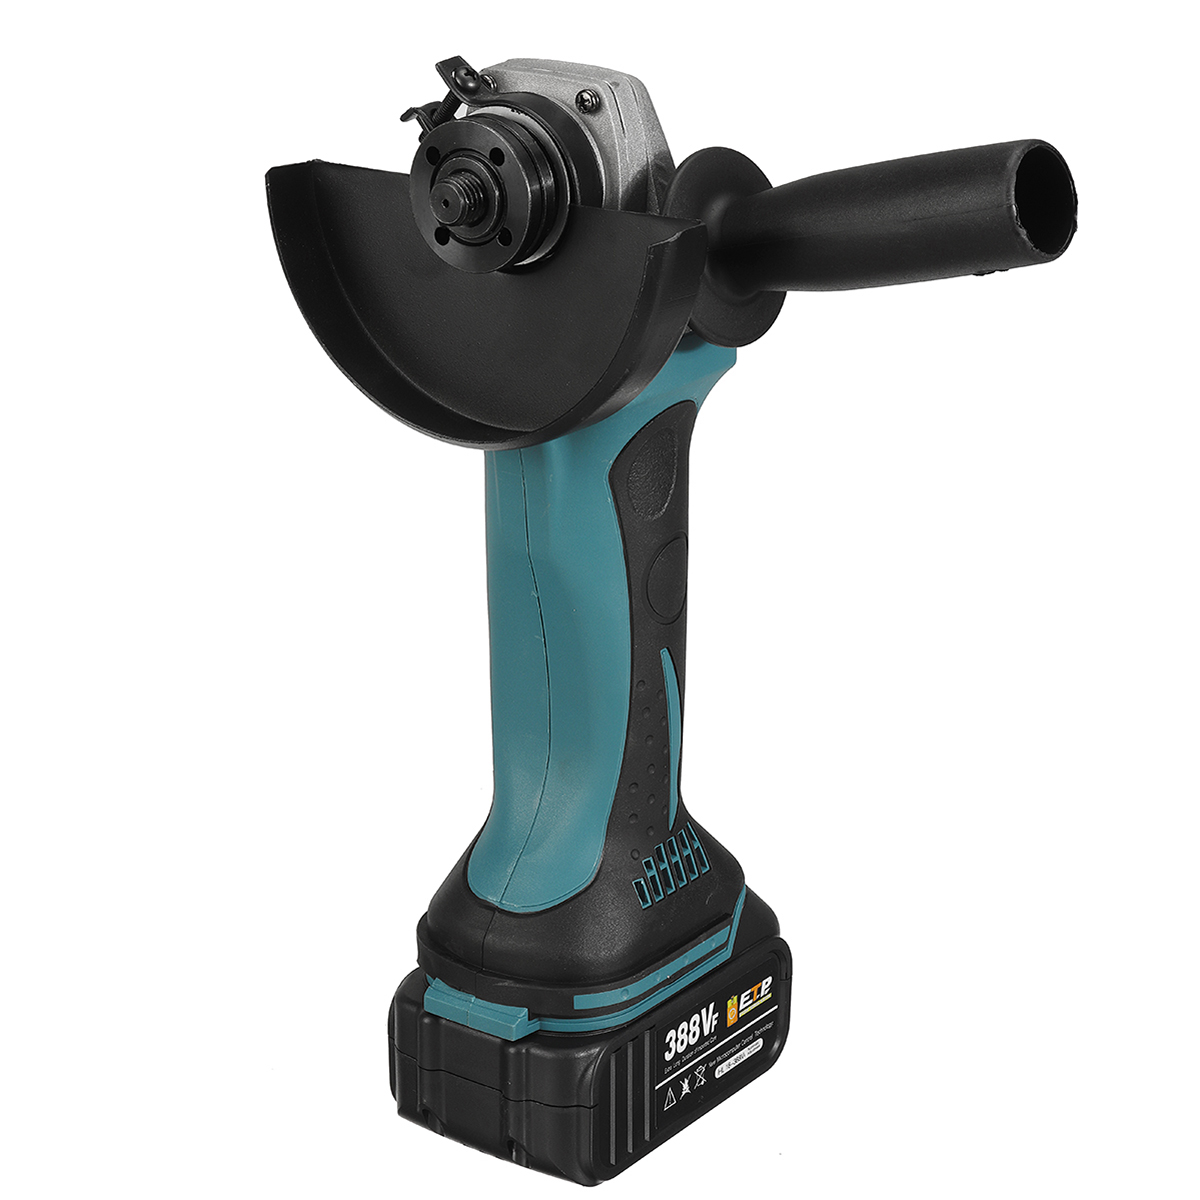 Drillpro-388VF-125mm-BlueBalck-Brushless-Motor-8500rpm-800W-Compact-Lithium-Electric-Polisher-1962696-10